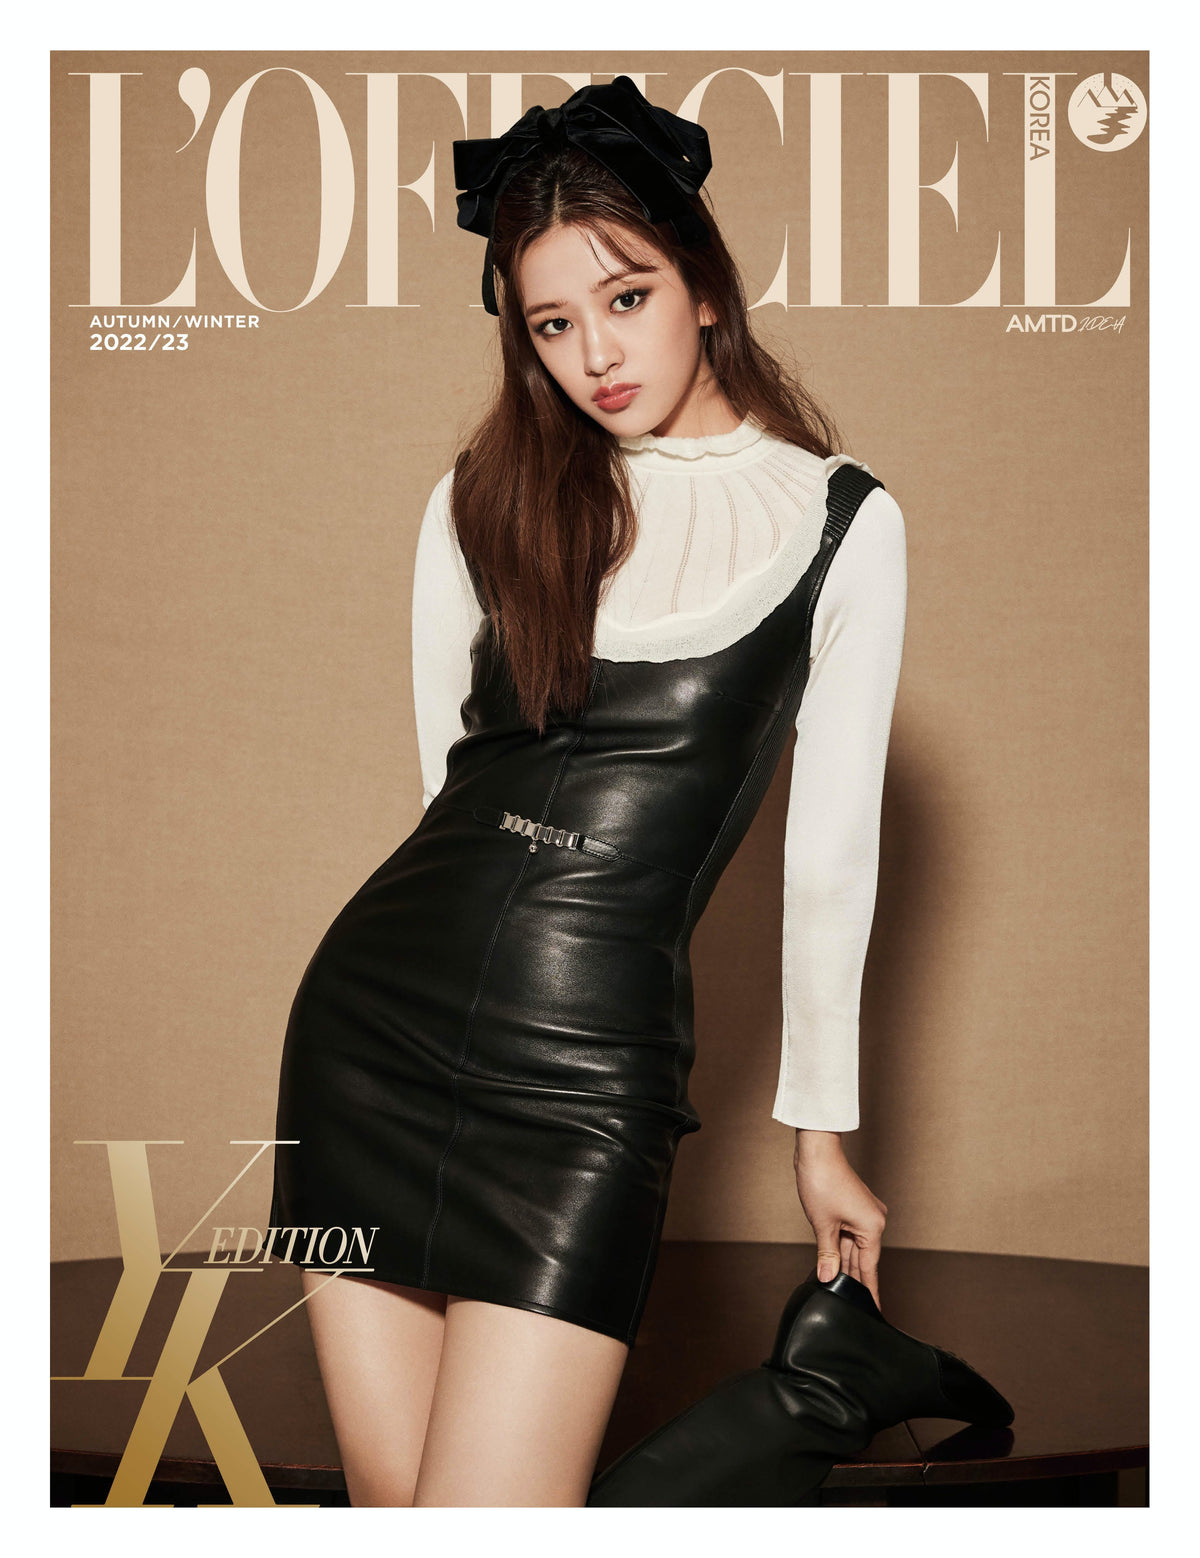 [L'Officiel] YK Edition Oct 2022 issue Type B [IVE - AN YUJIN]